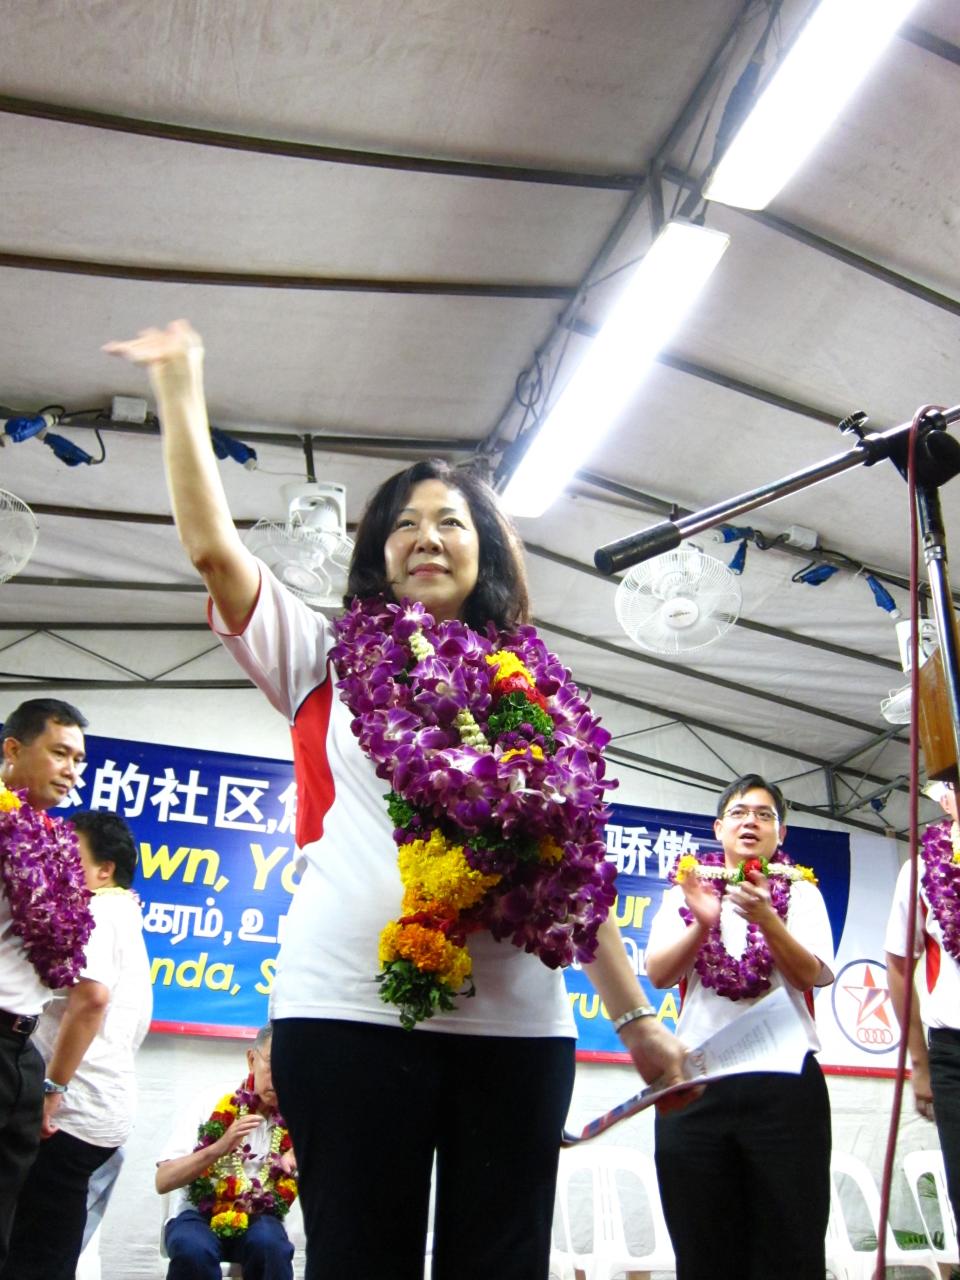 Lina Chiam responds to the crowd chanting her name. (Yahoo! photo/ Ewen Boey)